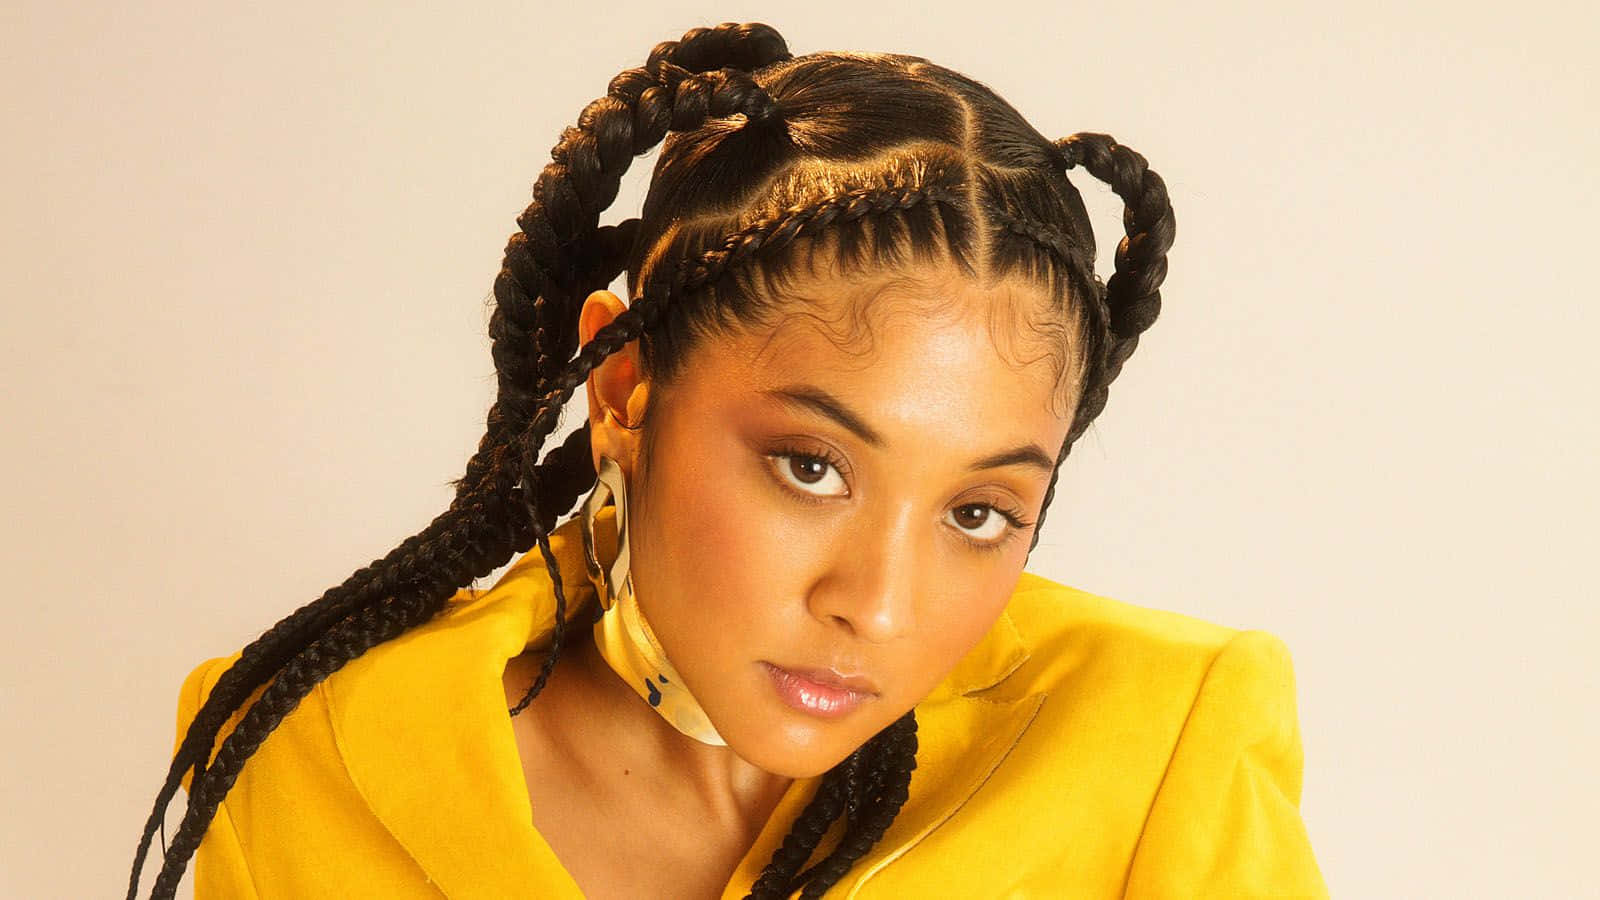 A Woman In A Yellow Jacket With Braids